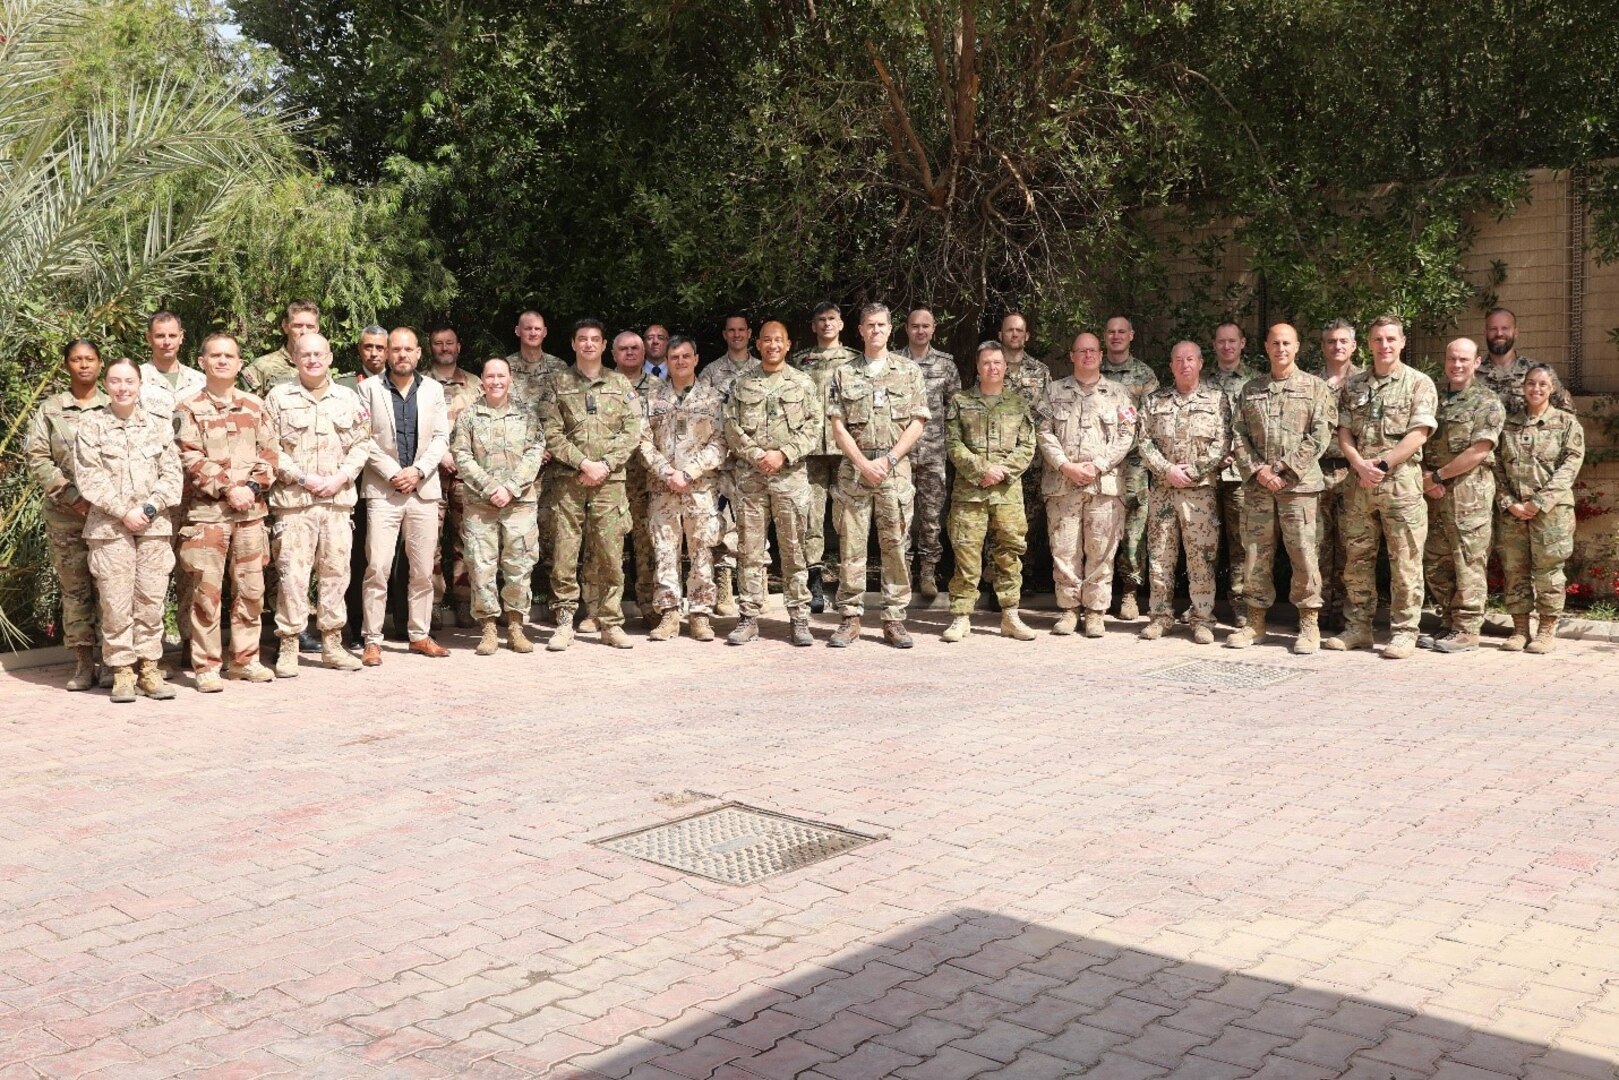 Defense attaches and global coalition members pose for a photograph during the defense attaché forum in Baghdad, Iraq, March 17, 2022. The defense attaché forum serves as an opportunity to build-relationships among Global Coalition members, and as a gateway to discuss topics pertaining to the enduring defeat of Da’esh including CJTF – OIR’s progress and areas of needed improvement. (U.S. Army photo by Staff Sgt. Bree-Ann Ramos-Clifton)